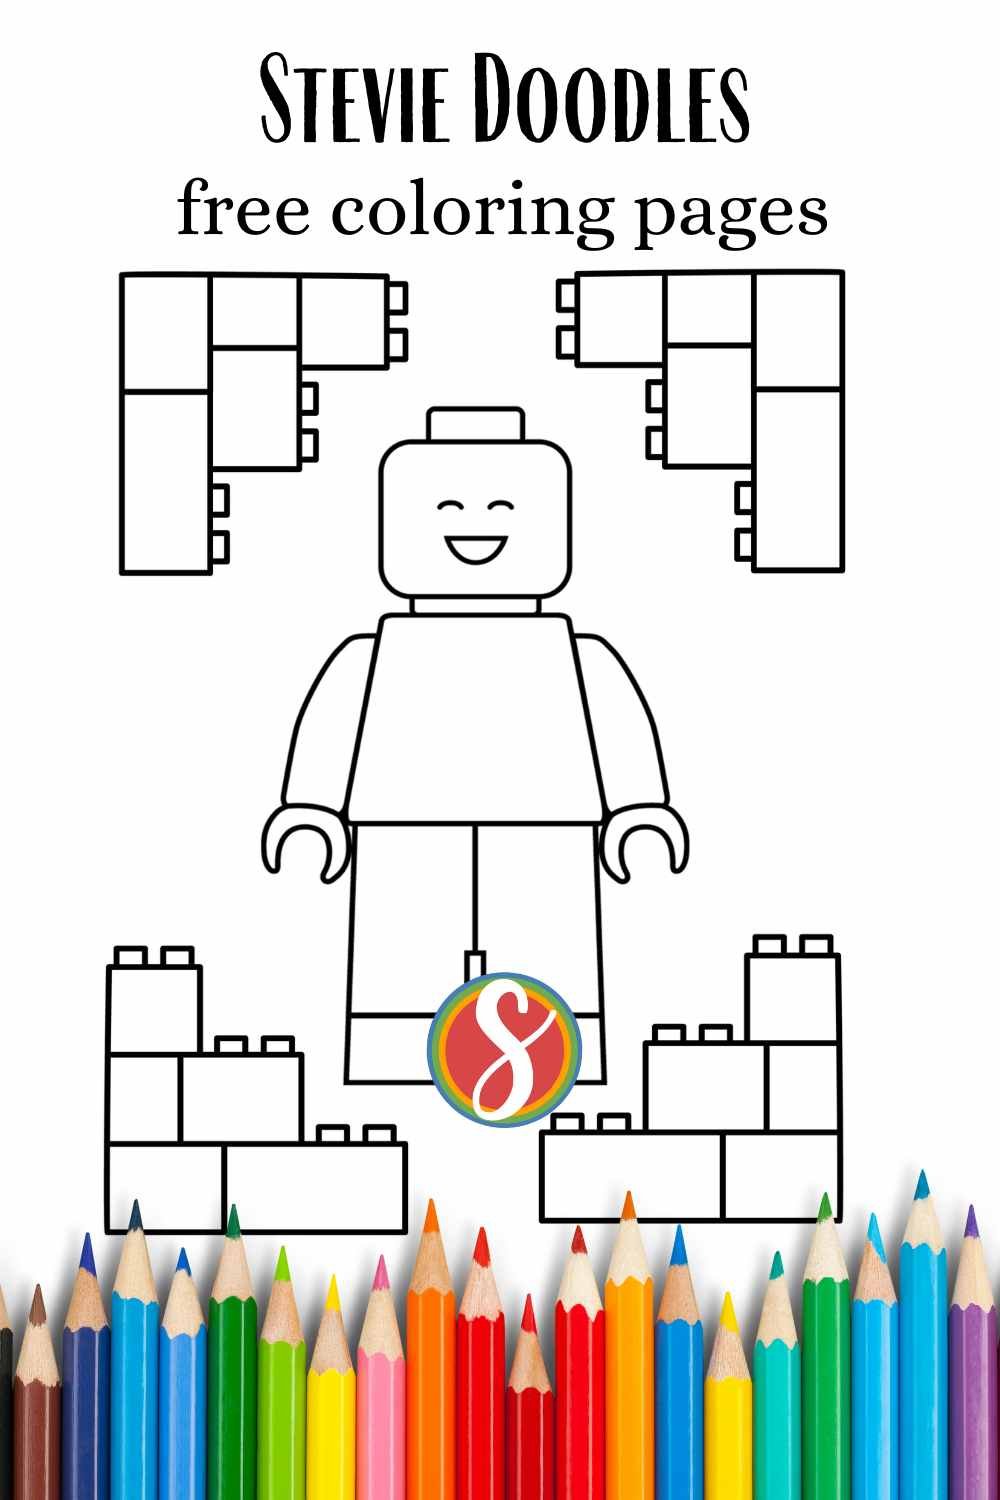 colorable lego man center and lego brick corners